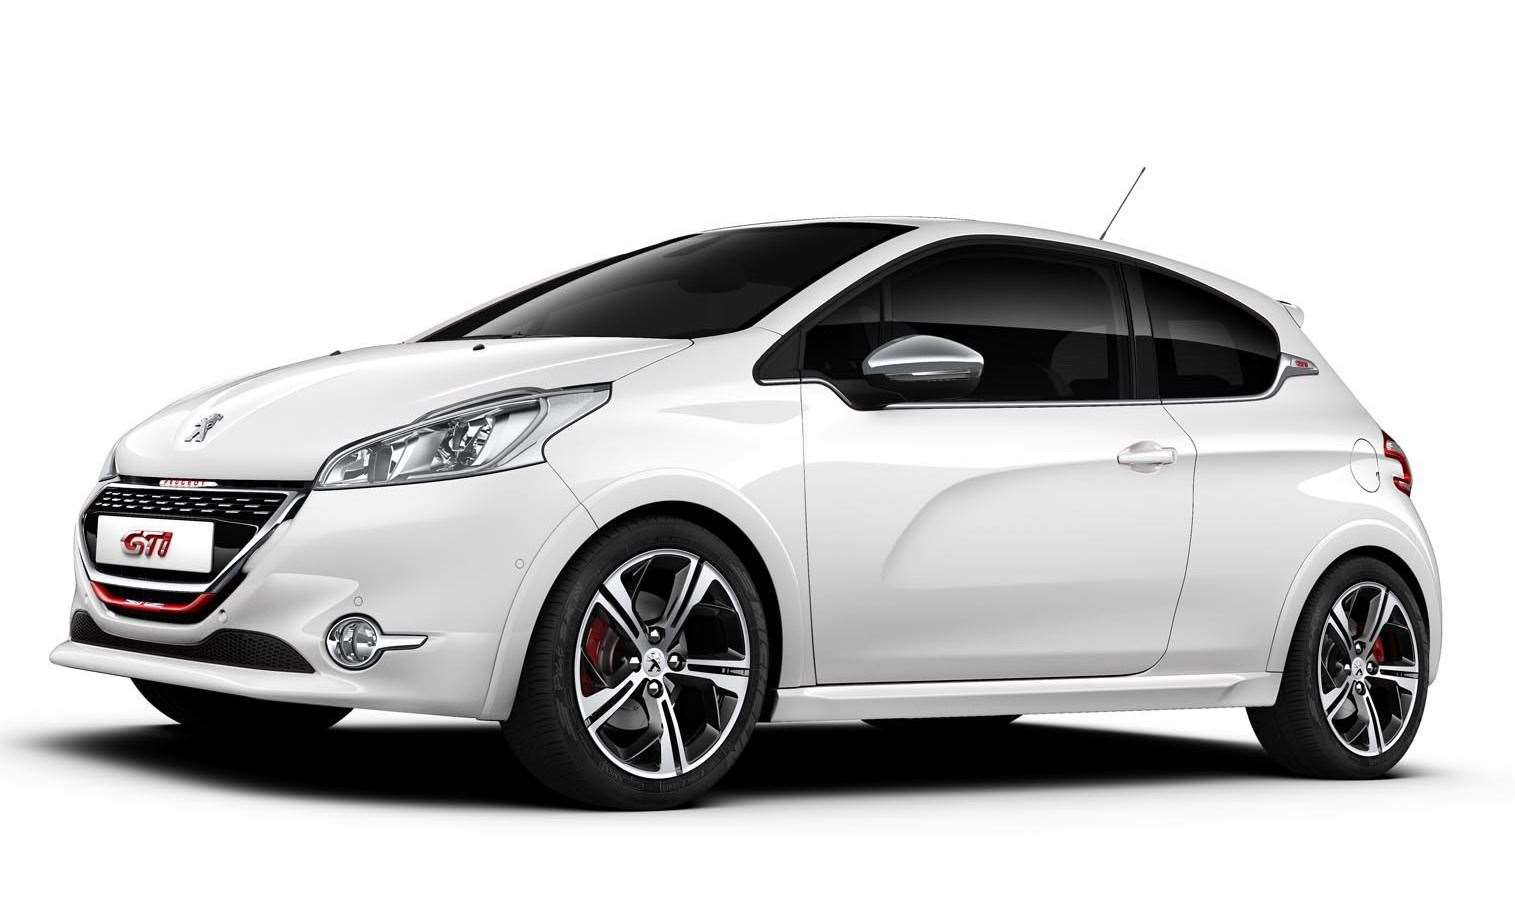 Police are looking for a stolen Peugeot 208 similar to this one